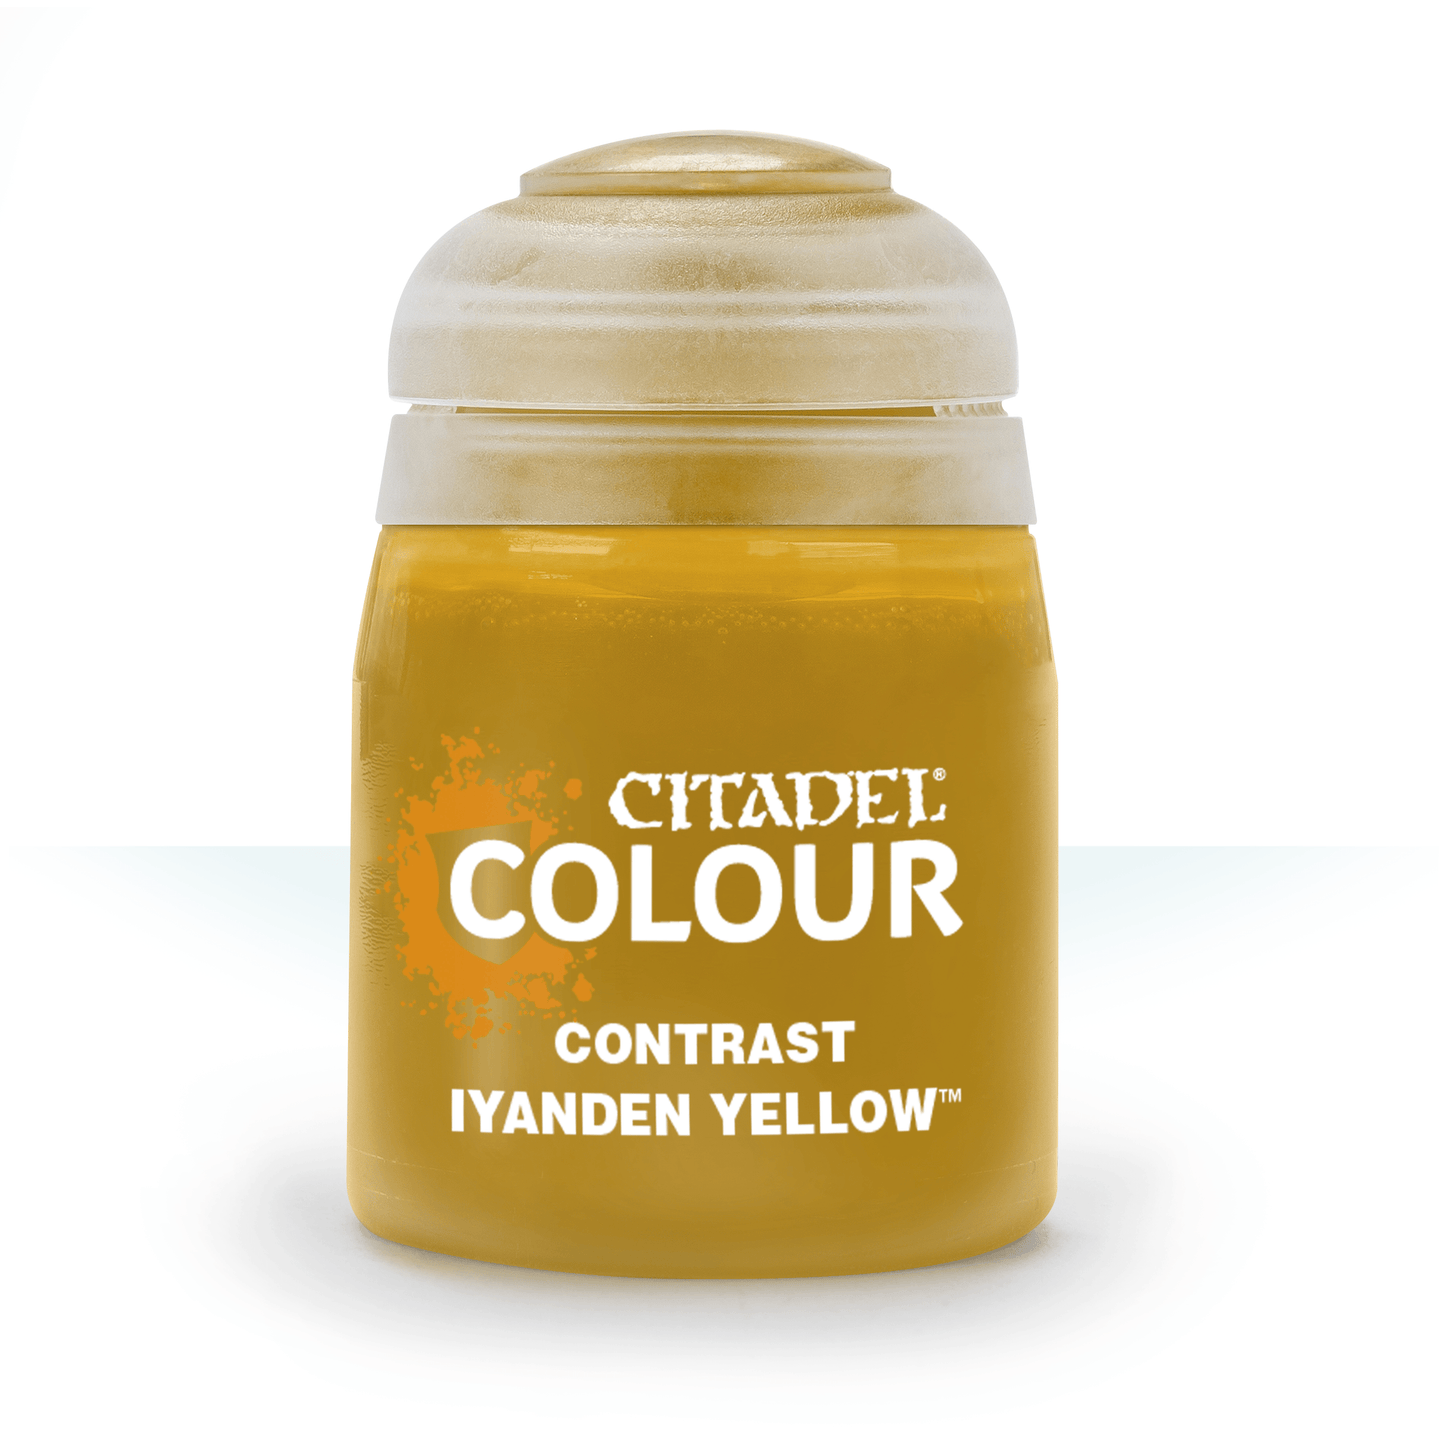 Citadel Colour - Iyanden Yellow Contrast Paint